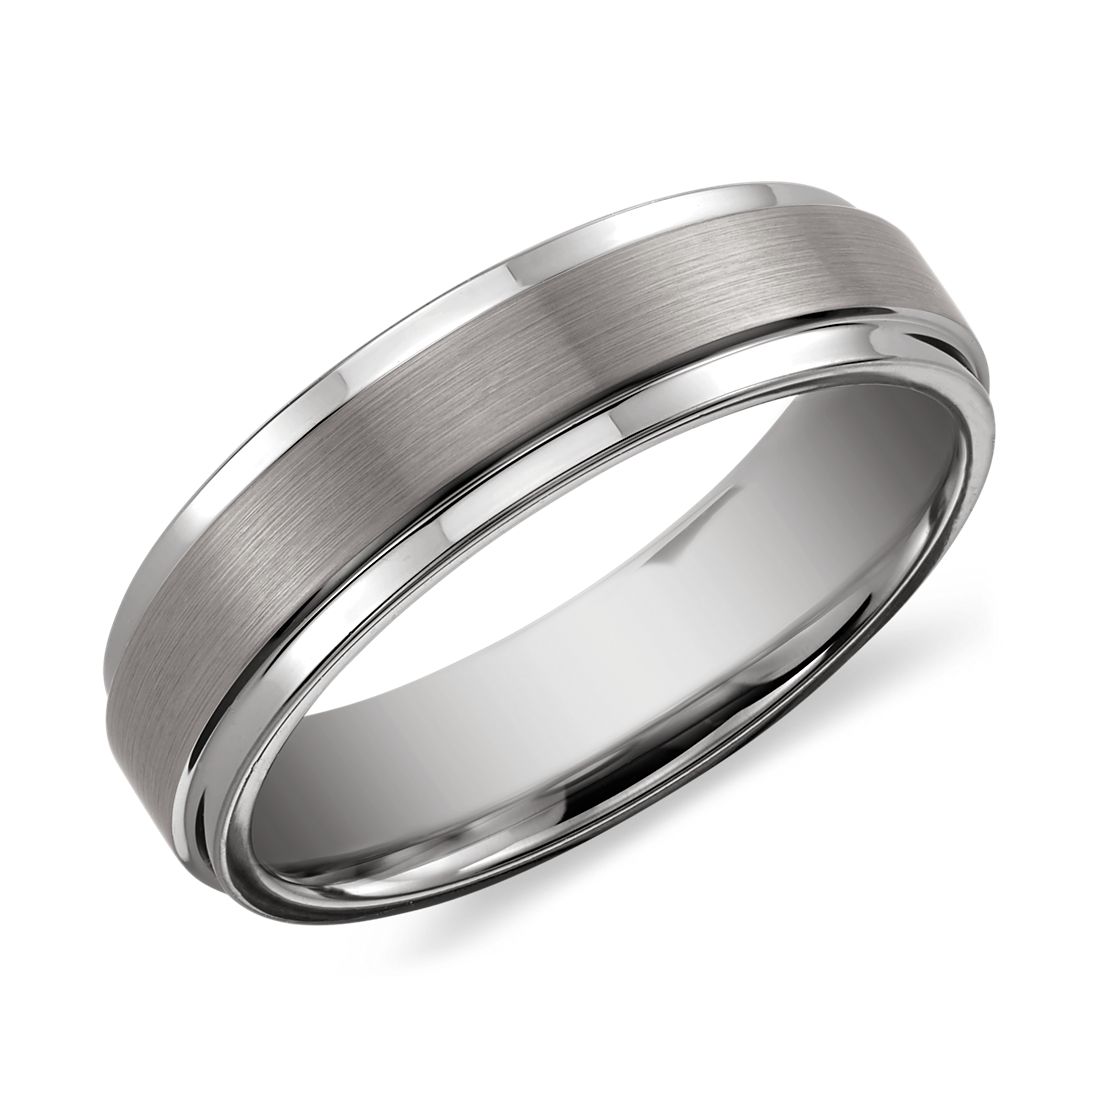 Titanium 6 mm Polished Wedding Ring Fine Jewelry Ideal Gifts For Women 